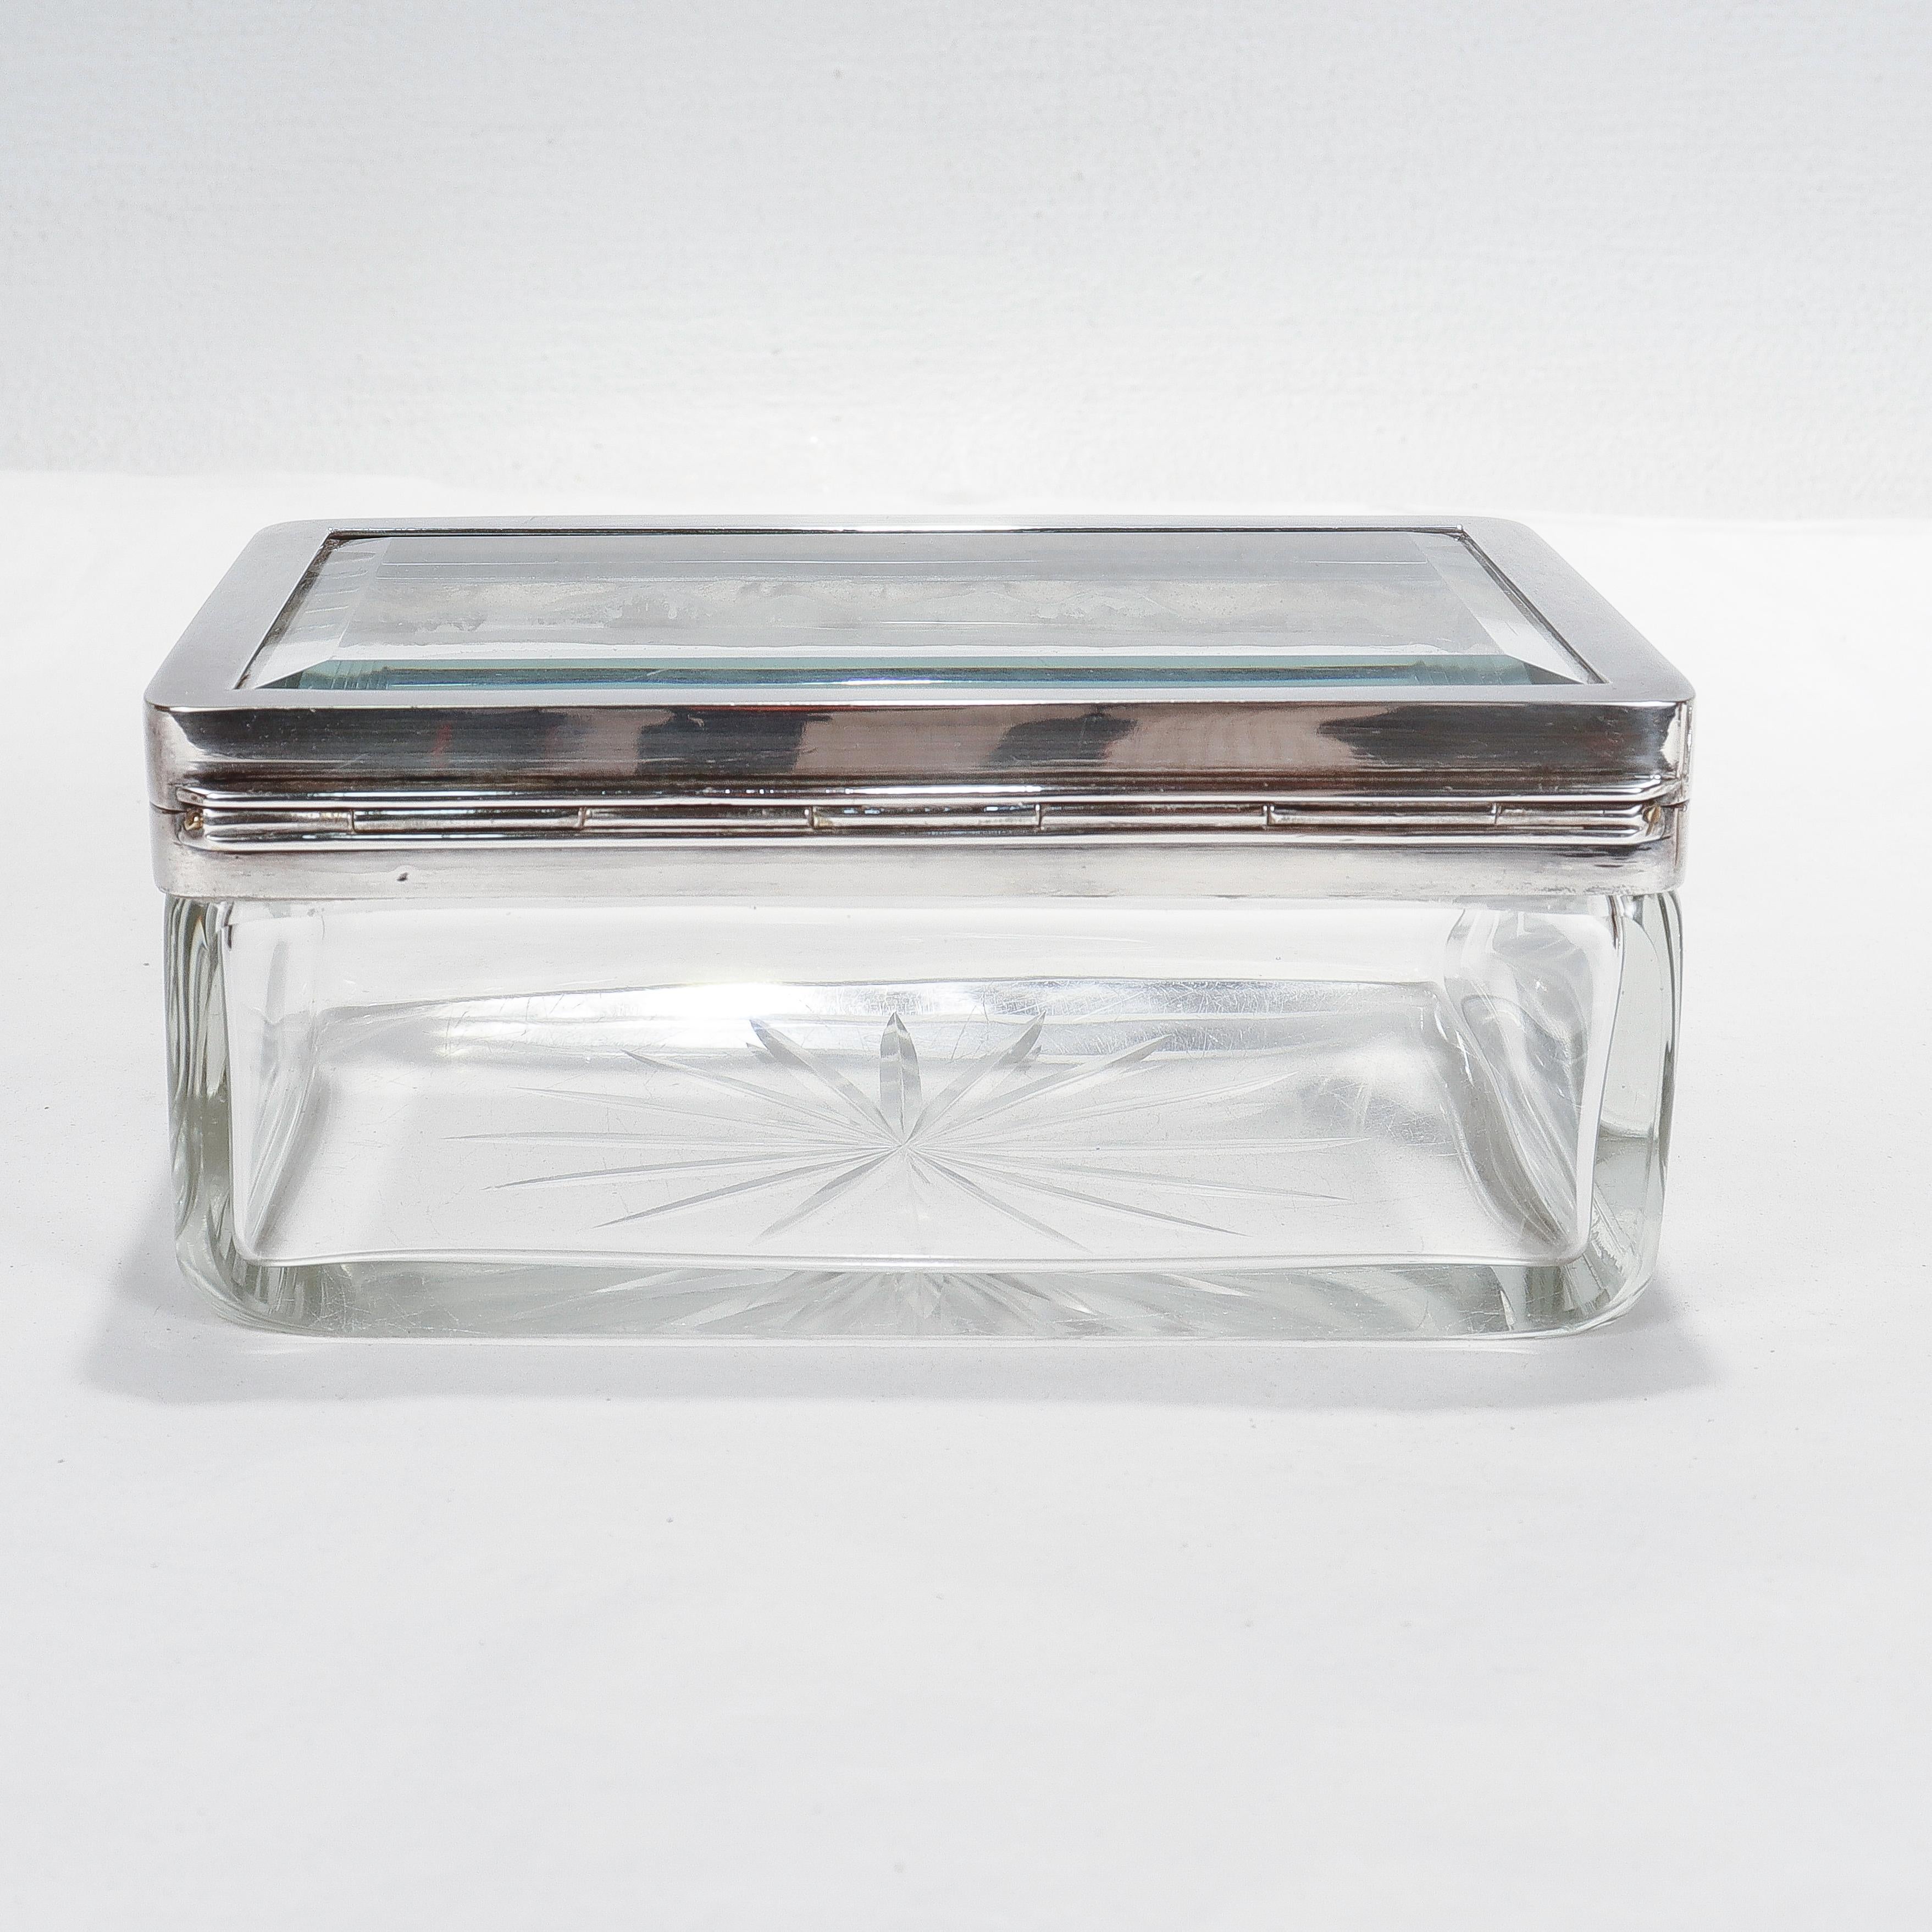 Austrian Art Deco Silver Plate & Cut Glass Casket or Table Box In Good Condition For Sale In Philadelphia, PA